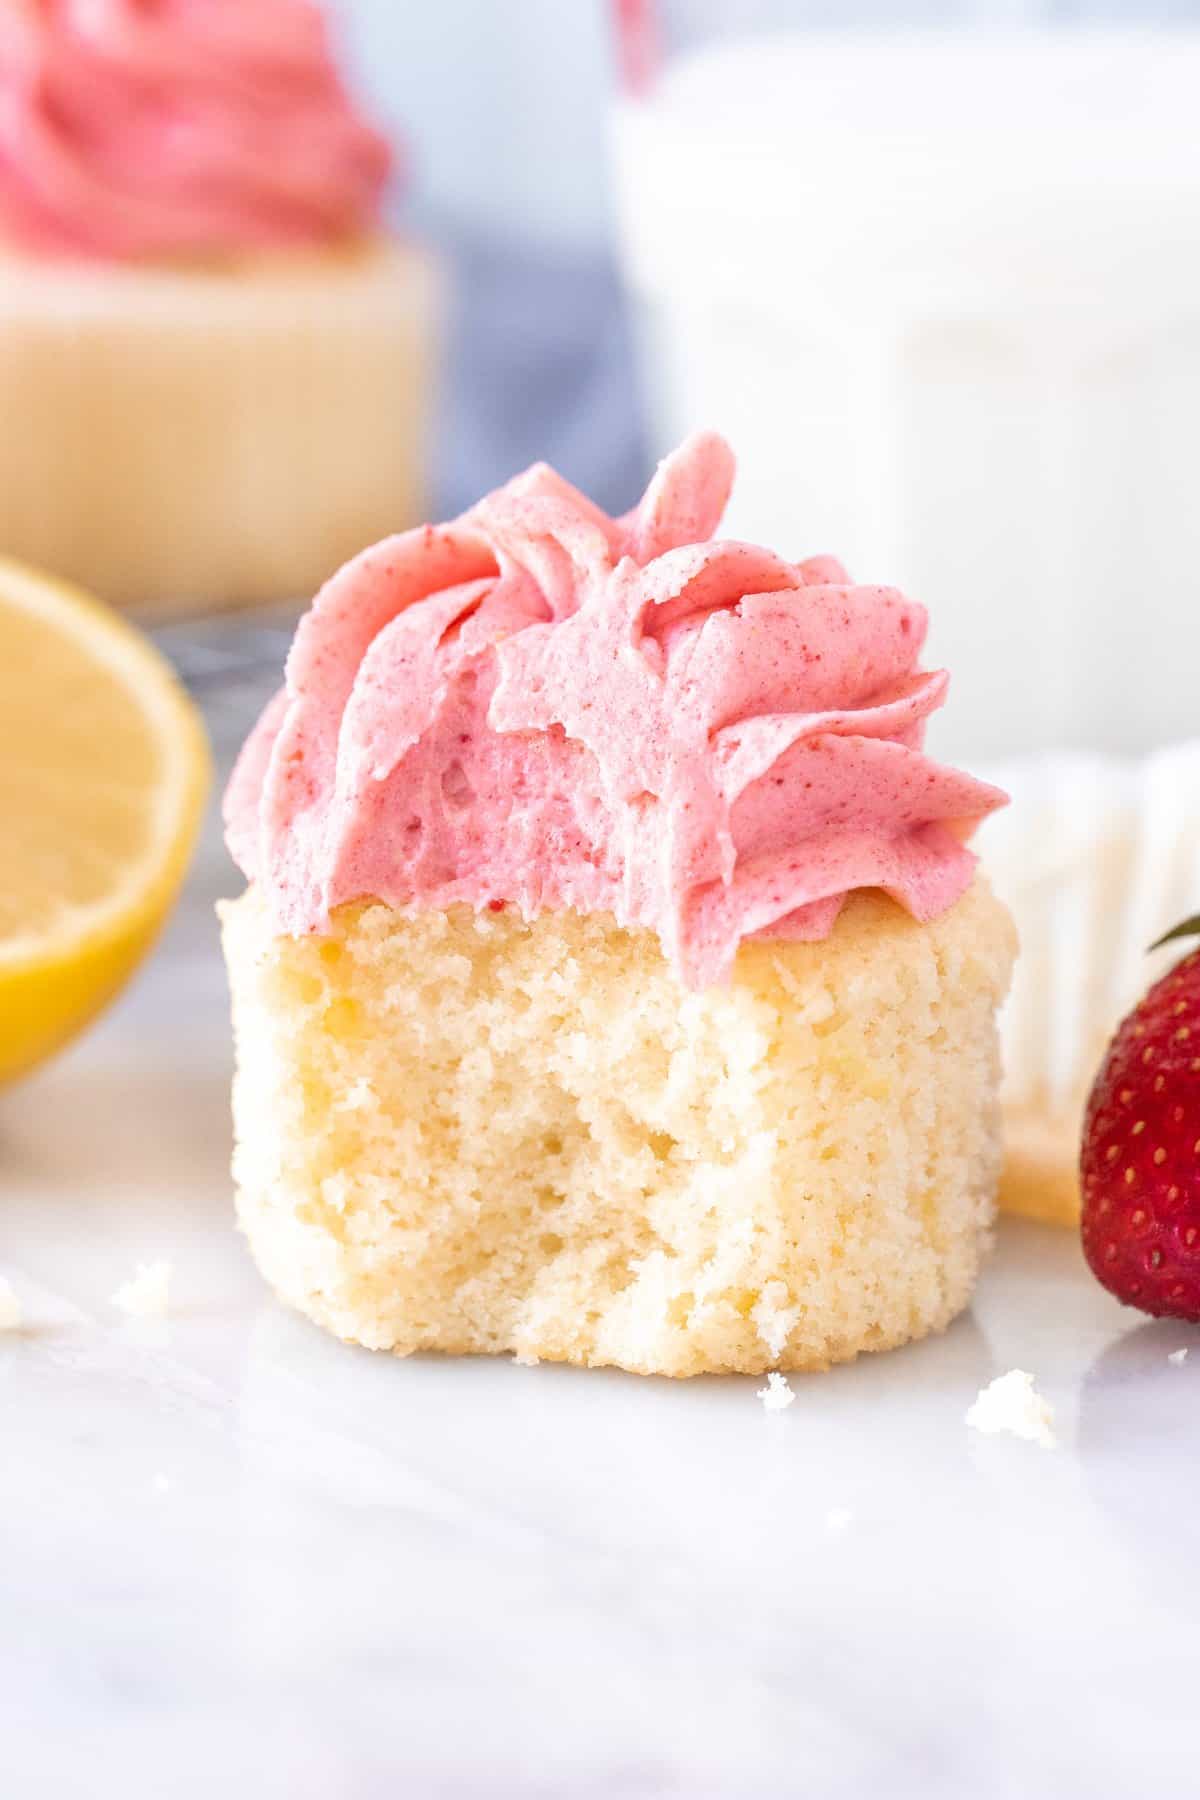 Strawberry lemonade cupcake with a bite taken out with a glass of milk